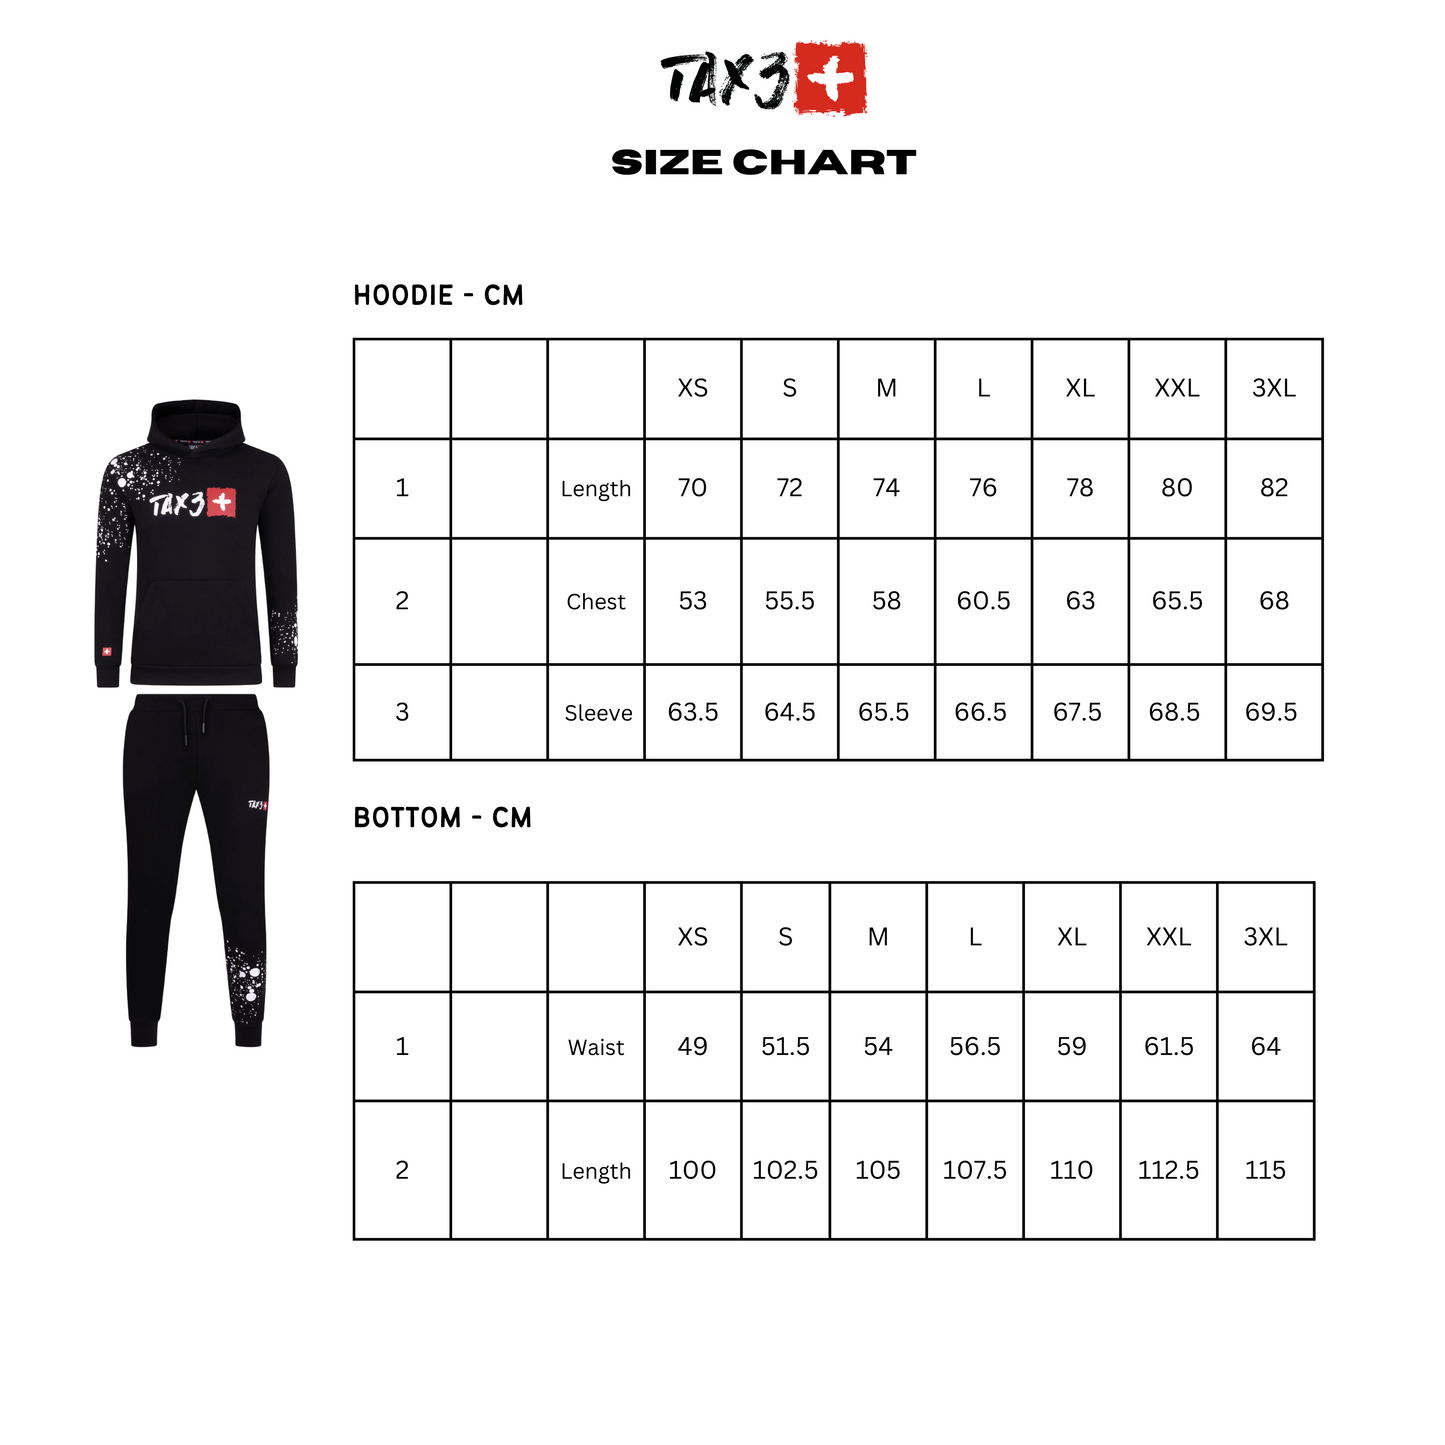 ITS RELEVANT 2.0 TRACKSUIT -  BLACK/WHITE